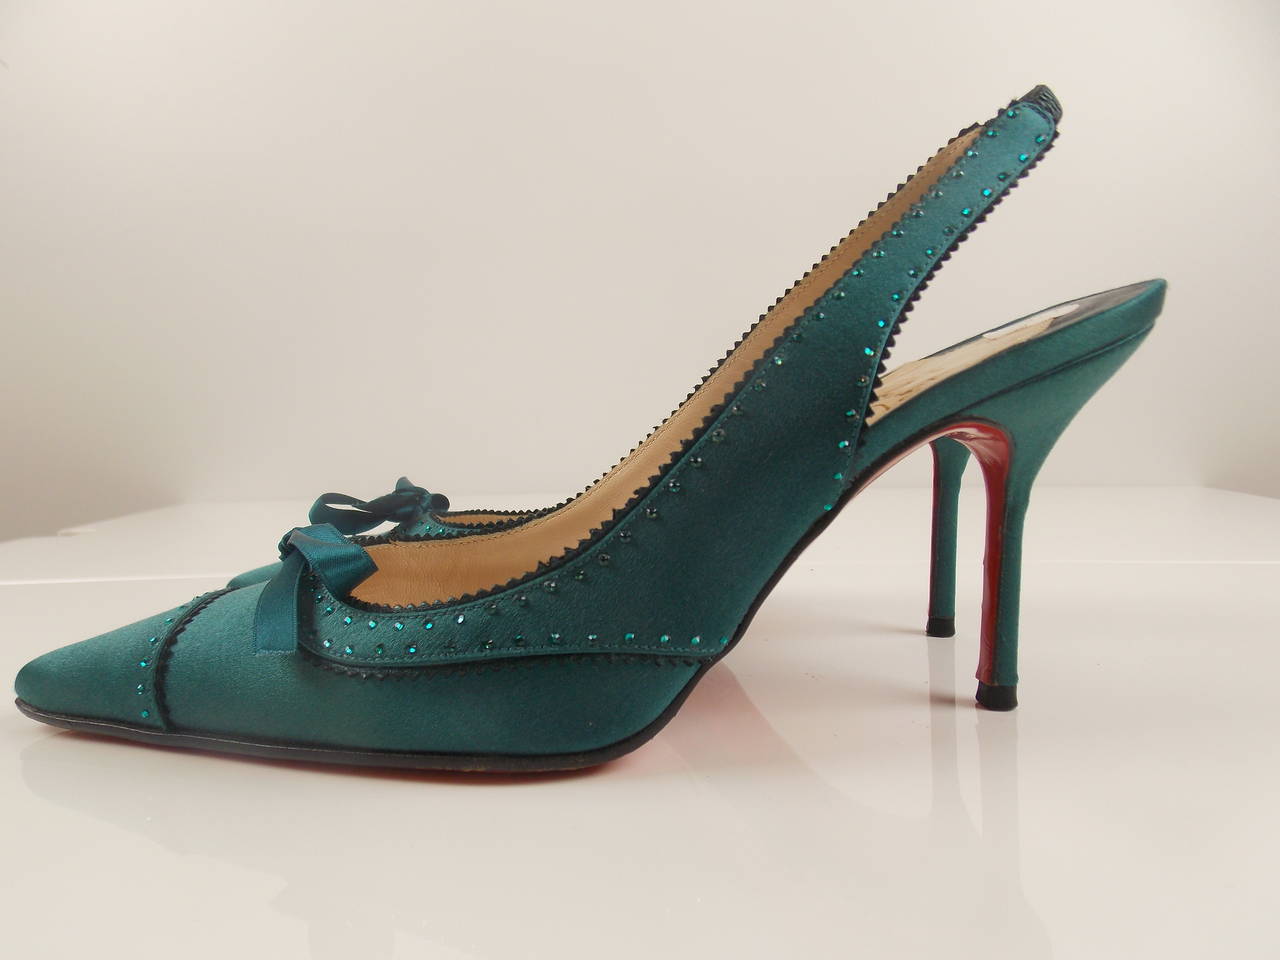 Teal, Satin, Sling Back Pumps, with rhinestone detail, and silk bow detail;
size 36.5, kitten heel